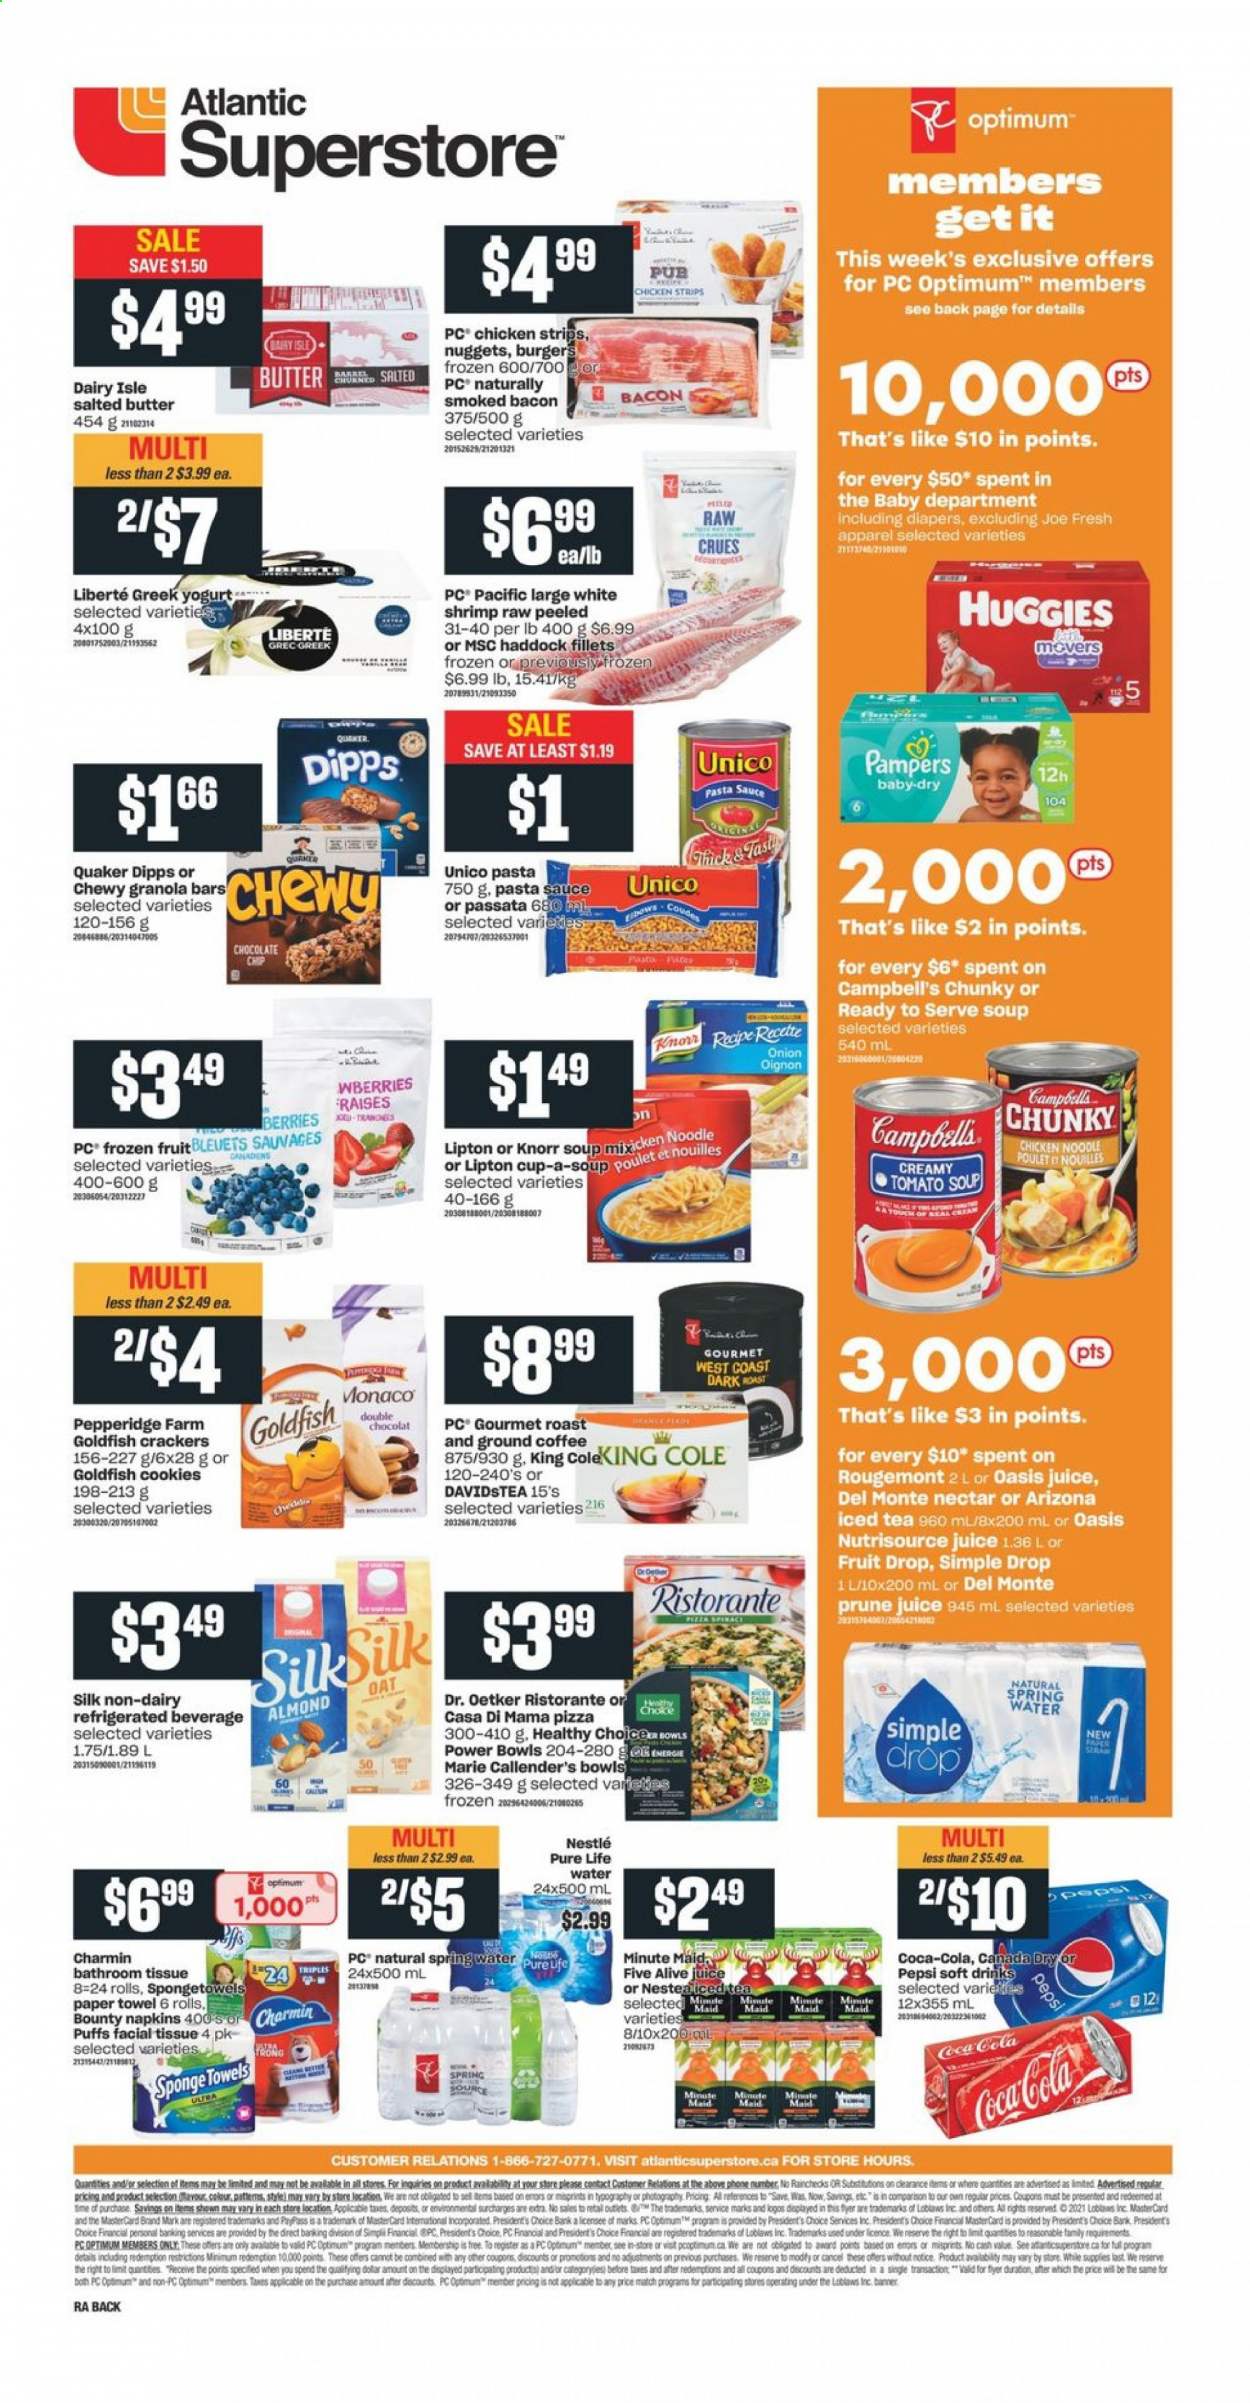 thumbnail - Atlantic Superstore Flyer - February 18, 2021 - February 24, 2021 - Sales products - puffs, haddock, shrimps, Campbell's, tomato soup, pizza, pasta sauce, soup, nuggets, hamburger, Quaker, noodles, Healthy Choice, Marie Callender's, bacon, Dr. Oetker, Président, greek yoghurt, yoghurt, Silk, butter, salted butter, strips, chicken strips, cookies, Bounty, crackers, Goldfish, oats, granola bar, Canada Dry, Coca-Cola, Pepsi, juice, ice tea, soft drink, AriZona, fruit punch, spring water, Pure Life Water, coffee, ground coffee, nappies, napkins, bath tissue, paper towels, Charmin, Optimum, NutriSource, Knorr, Nestlé, Huggies, Pampers. Page 2.